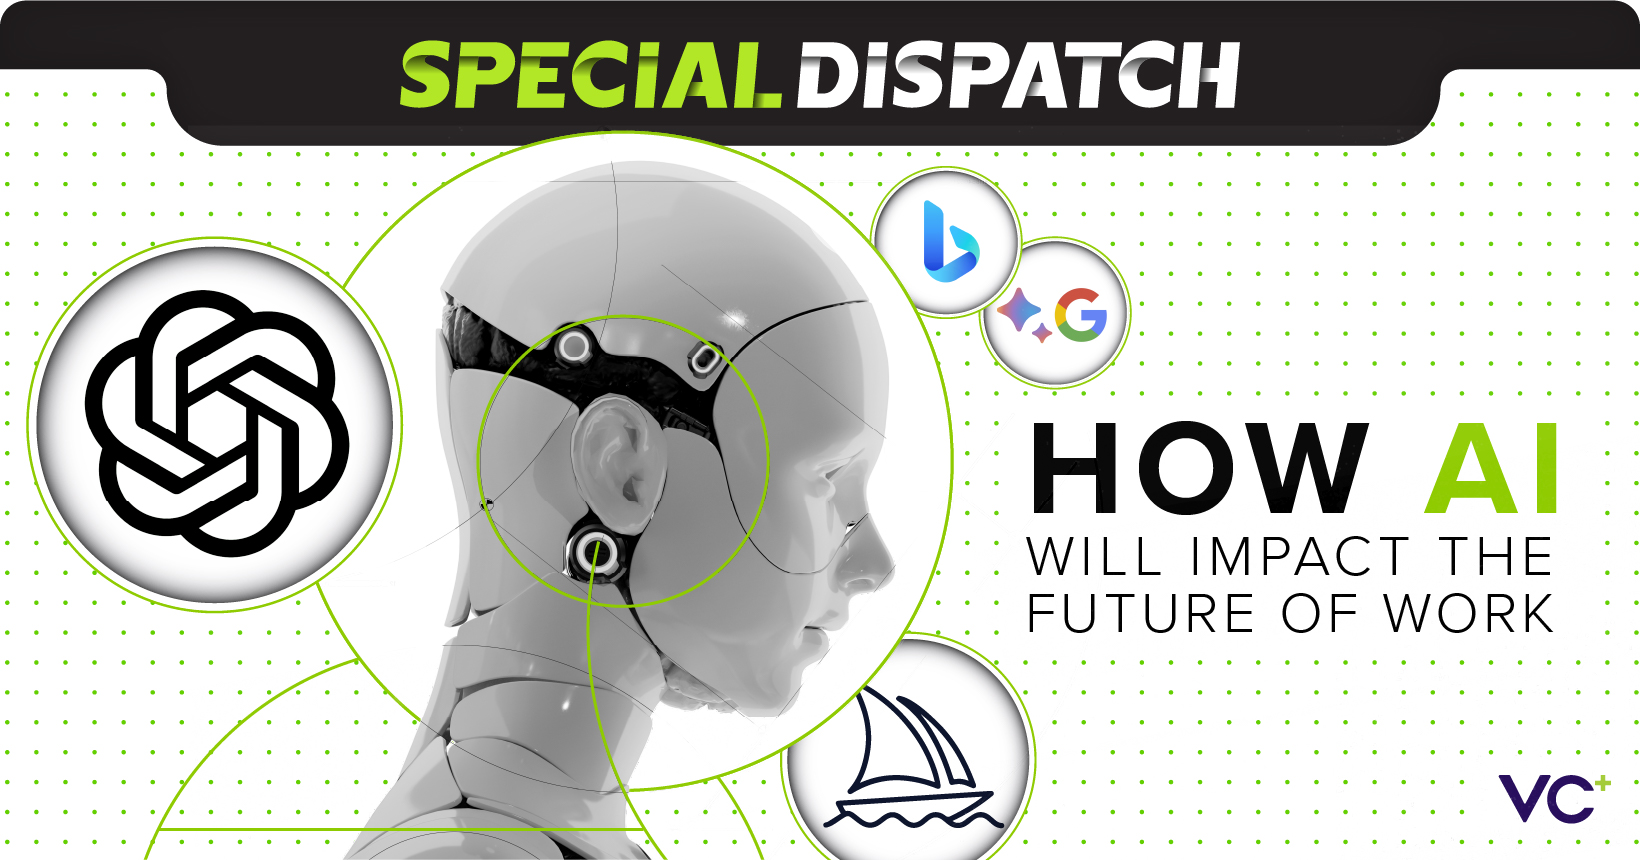 Promo image of a special dispatch about AI and the future of work featuring a humanoid robot surrounded by the ChatGPT logo, Midjourney logo, Bing logo, and Google Bard logo.